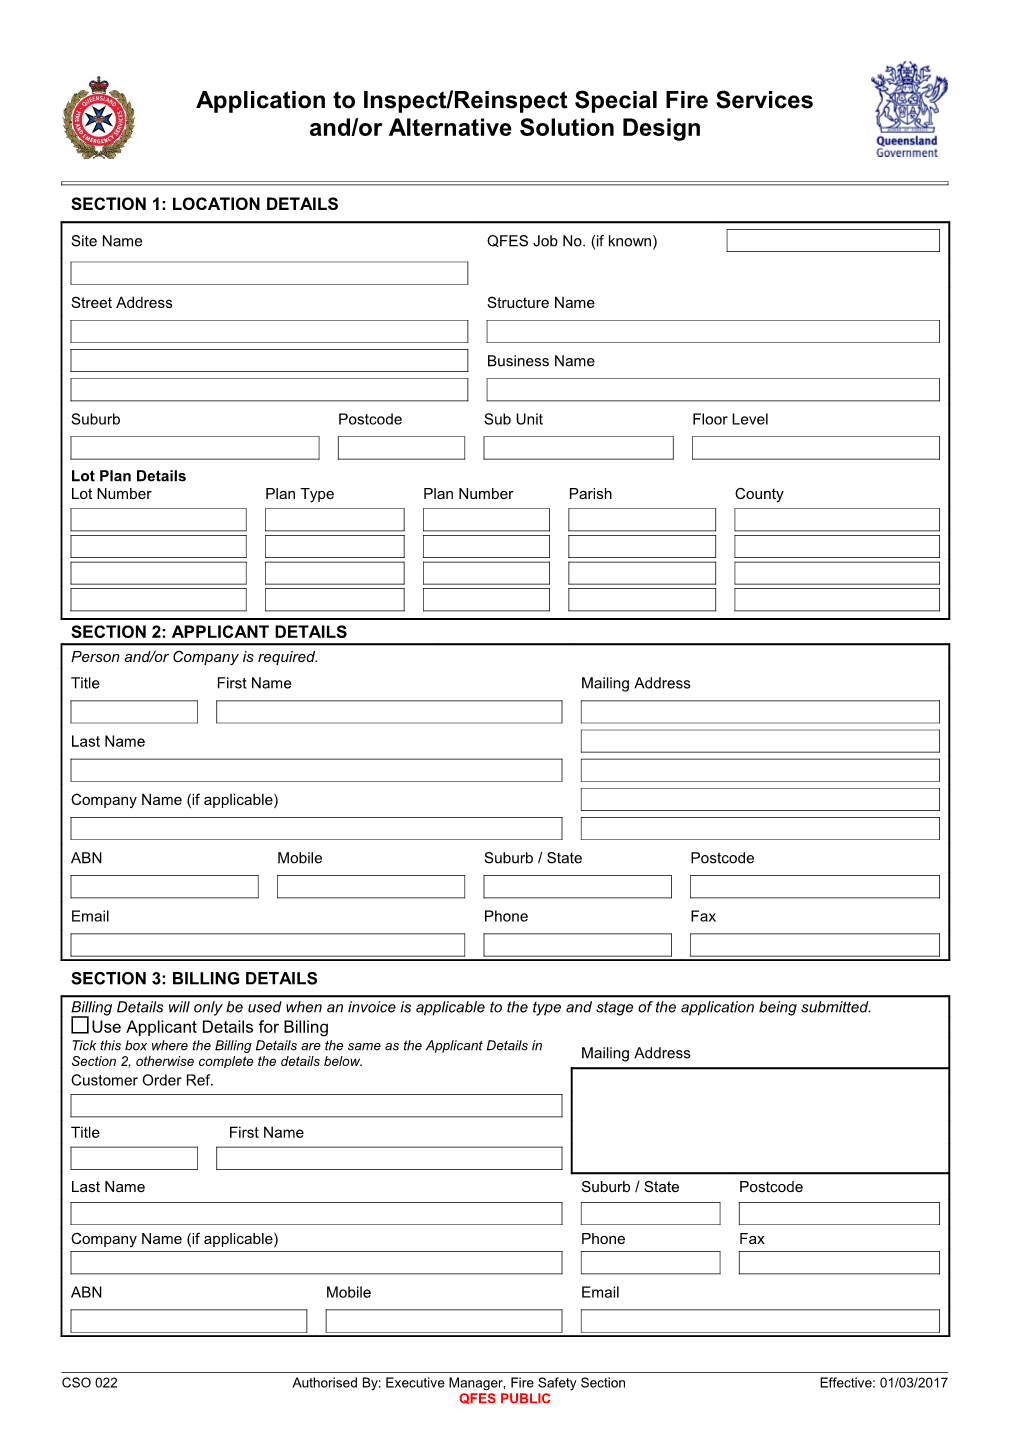 CSO 022 Application for Inspection